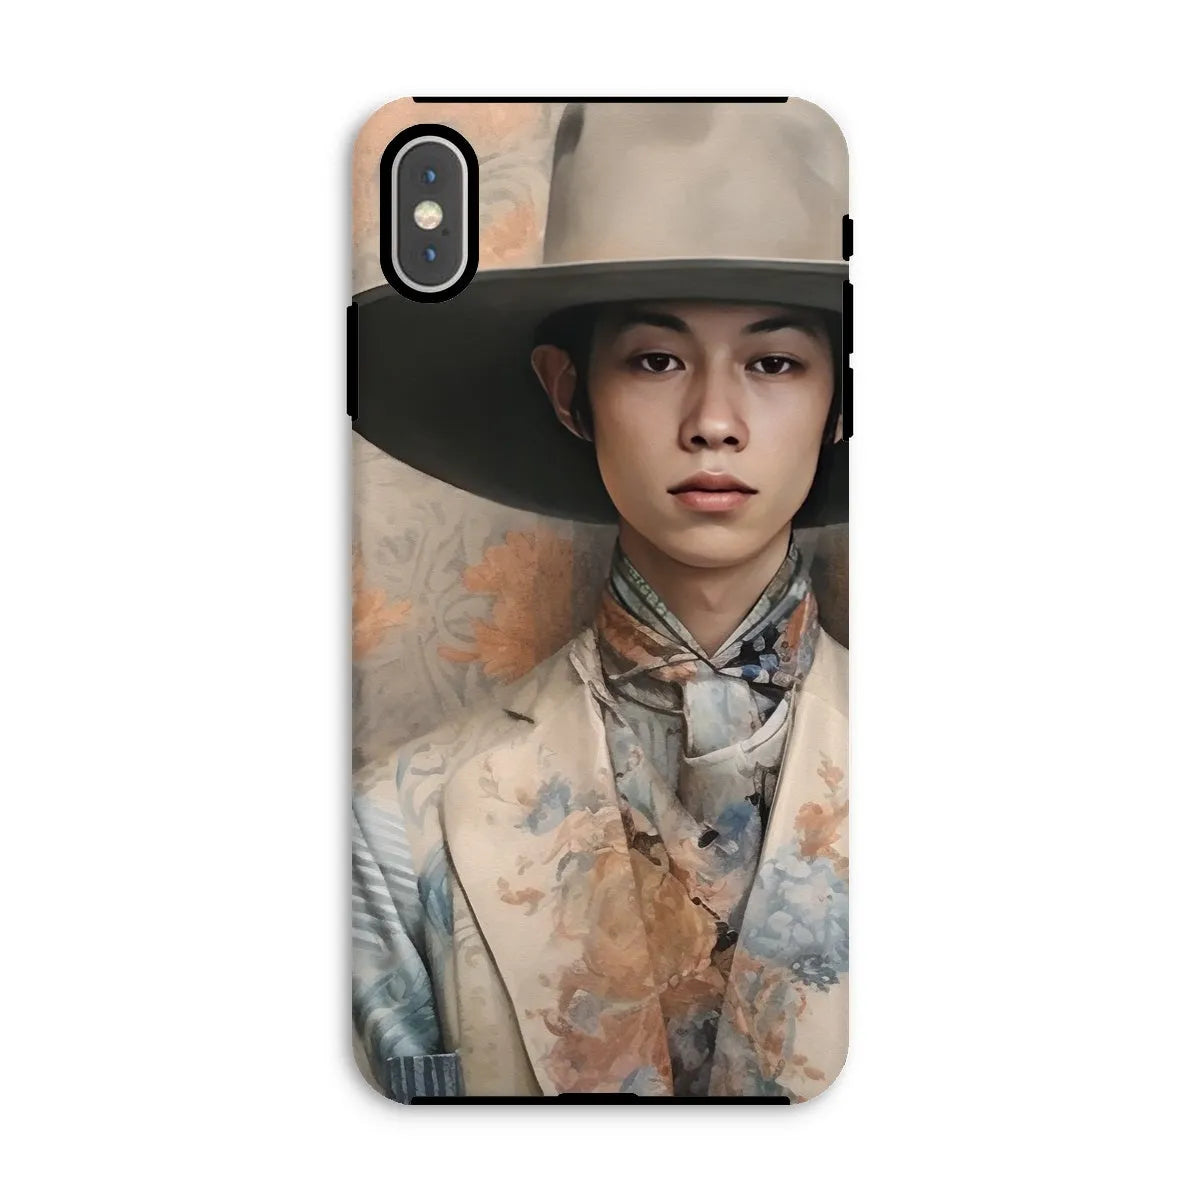 Thuanthong The Transgender Cowboy - Thai F2m Art Phone Case - Iphone Xs Max / Matte - Mobile Phone Cases - Aesthetic Art